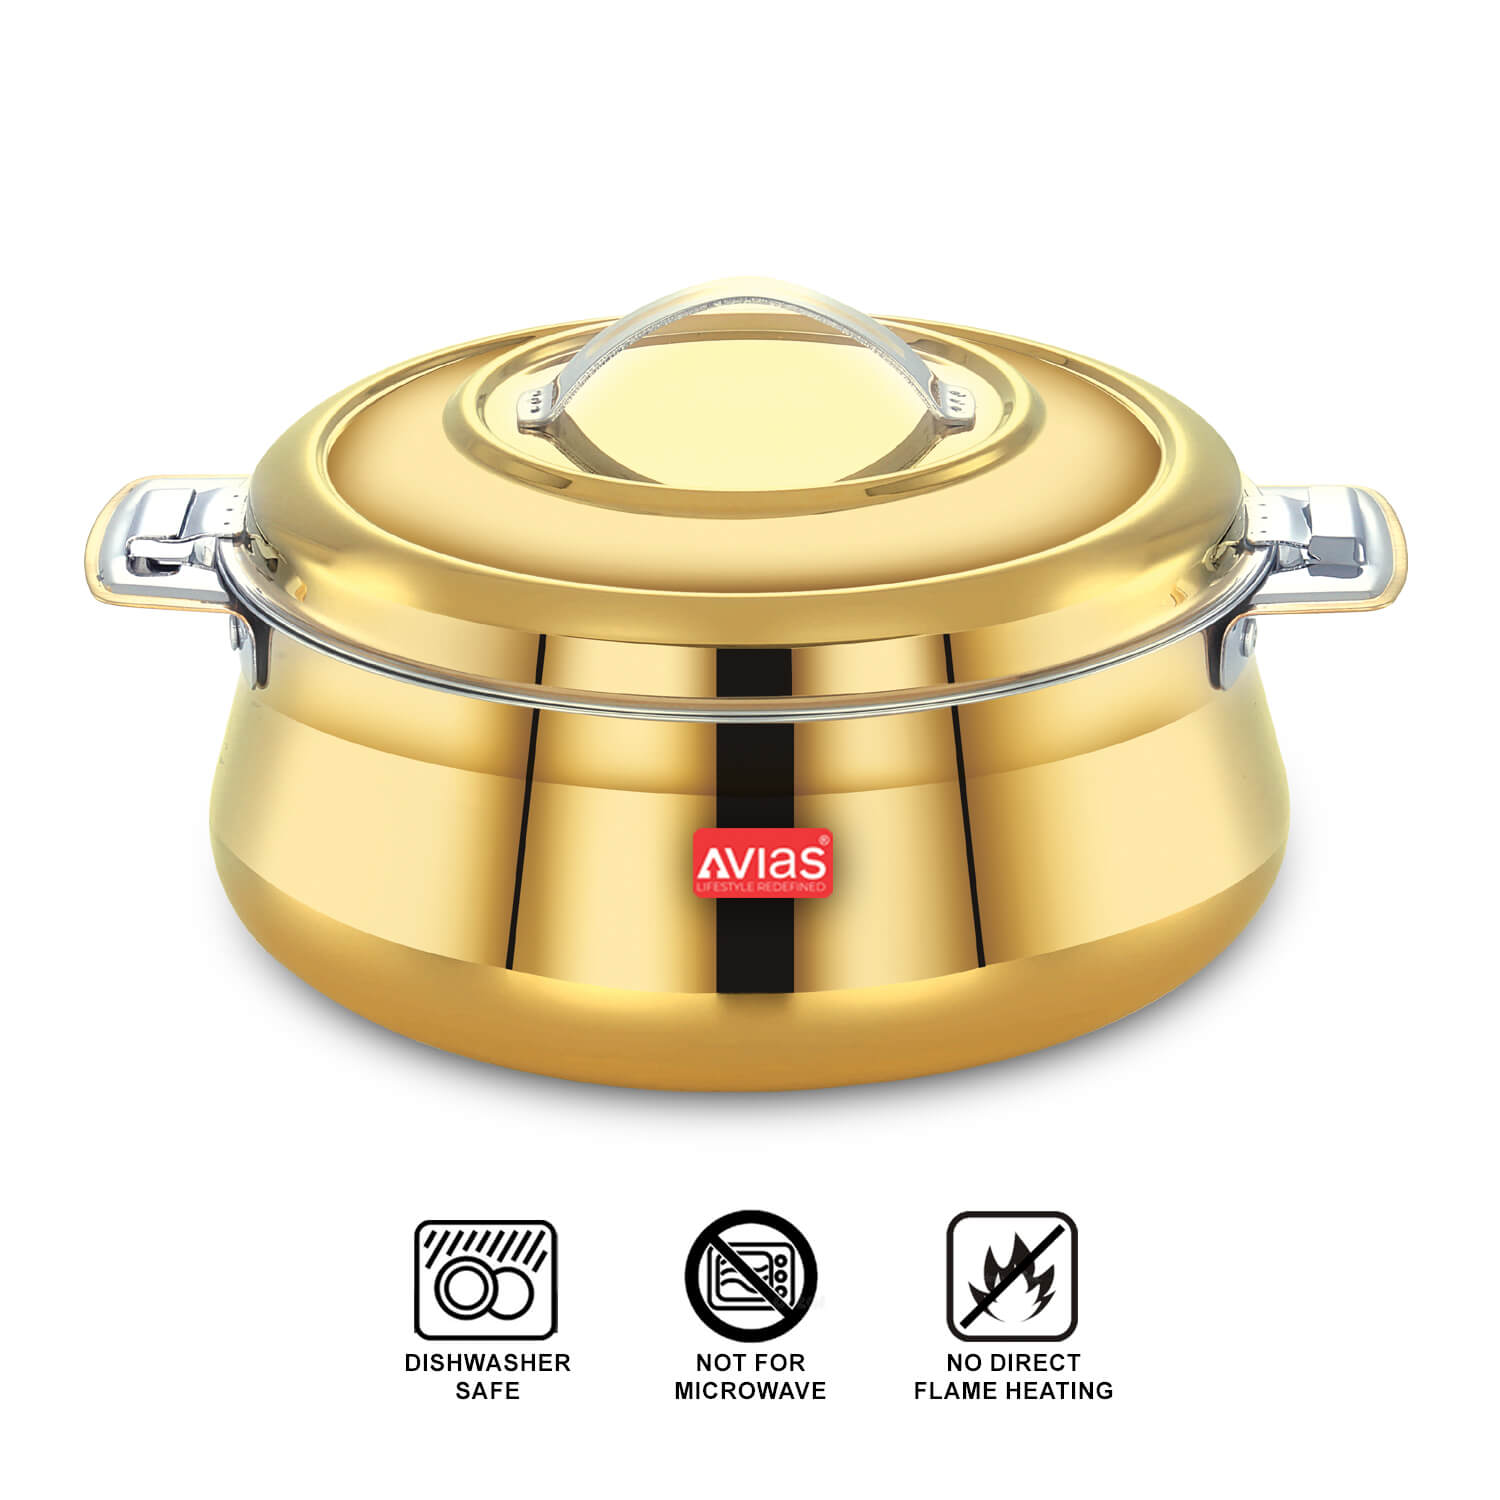 AVIAS Riara Gold Premium Stainless steel casserole/ hotpot/ hot case with twist lock with sturdly side handles | Roti/ chapati, curry , gravy, rice serveware | 1.5L/ 2.5L